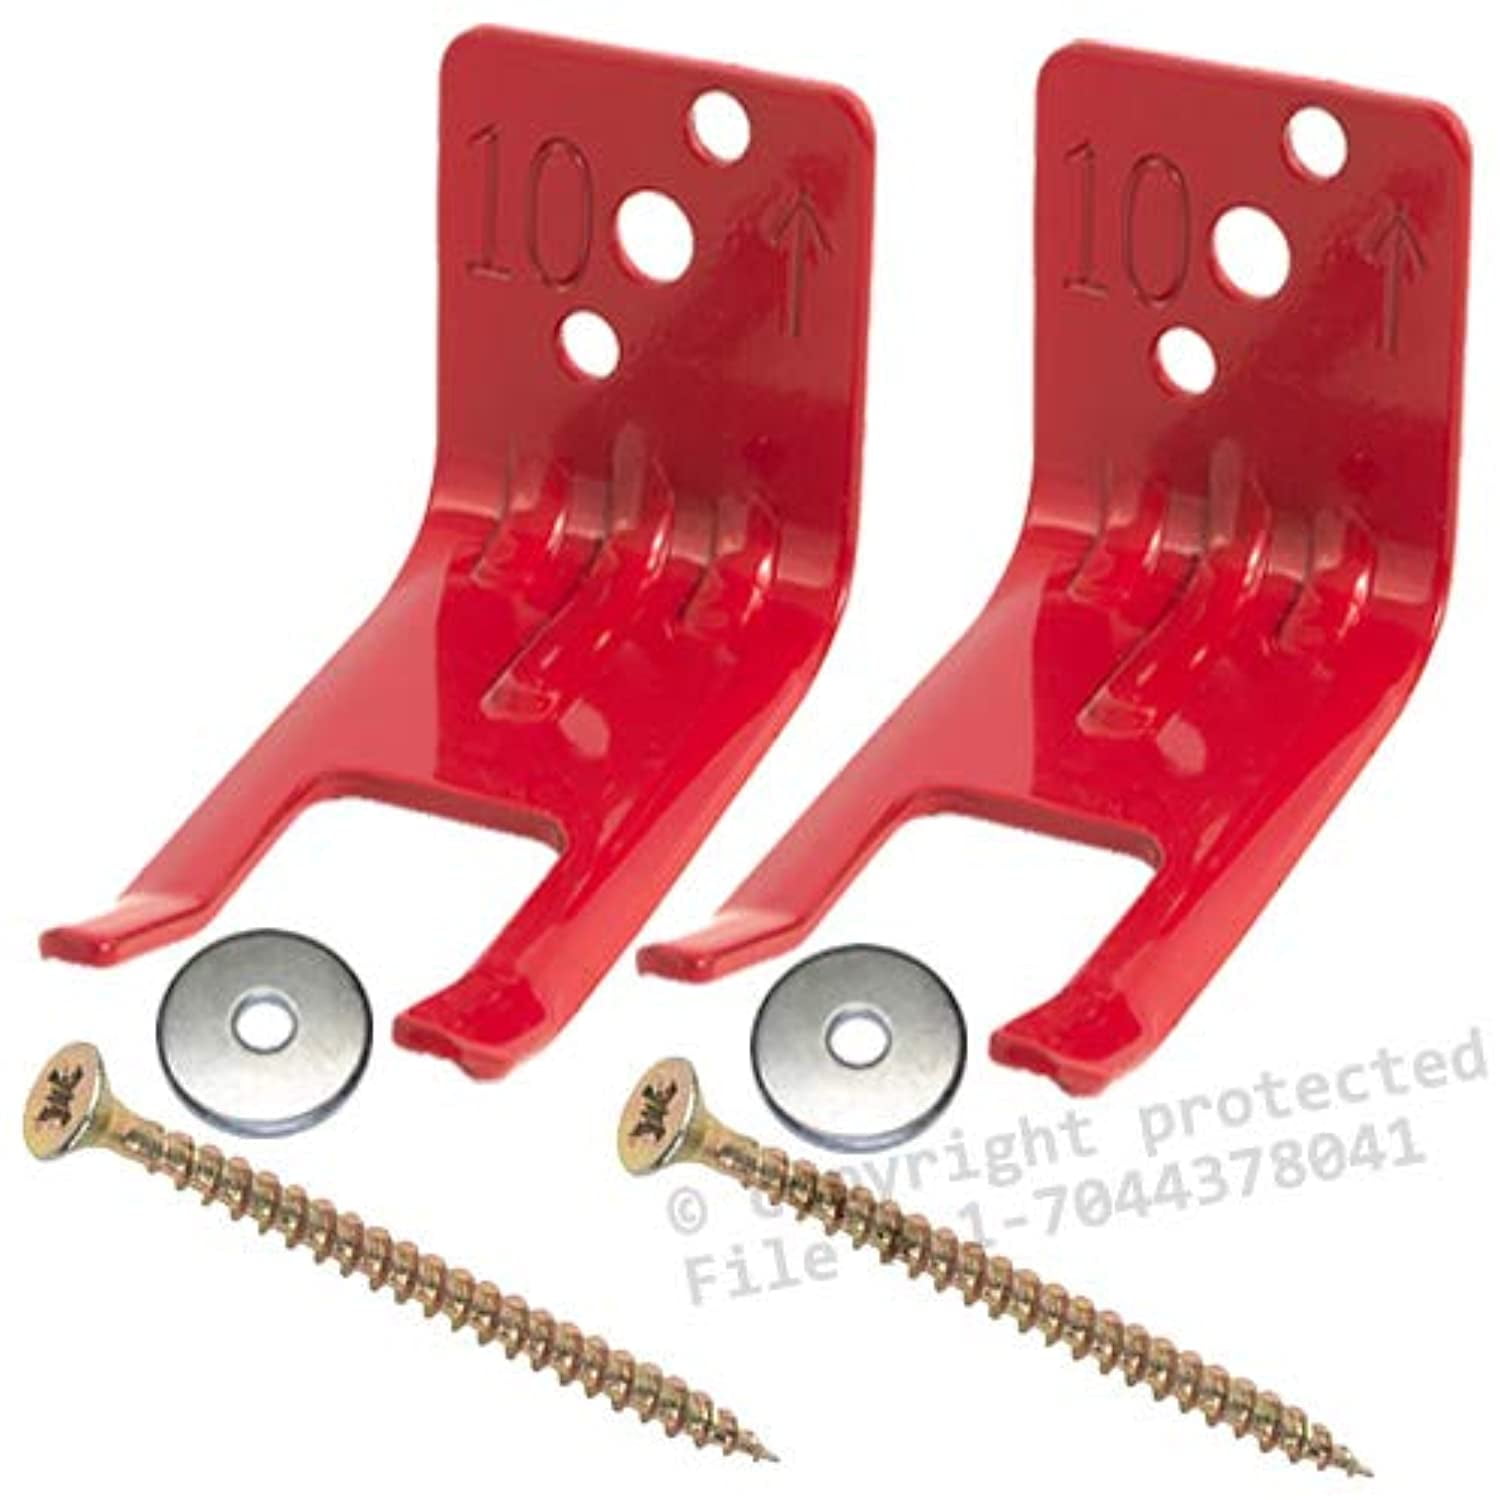 Universal for all Extinguishers with Valve Body Slots Amerex Fork Style Mount FREE SCREWS & WASHERS INCLUDED Hanger for a 2 1/2 to 5 Lb - Fire Extinguisher Bracket Wall Hook Extinguishers 6 Pack